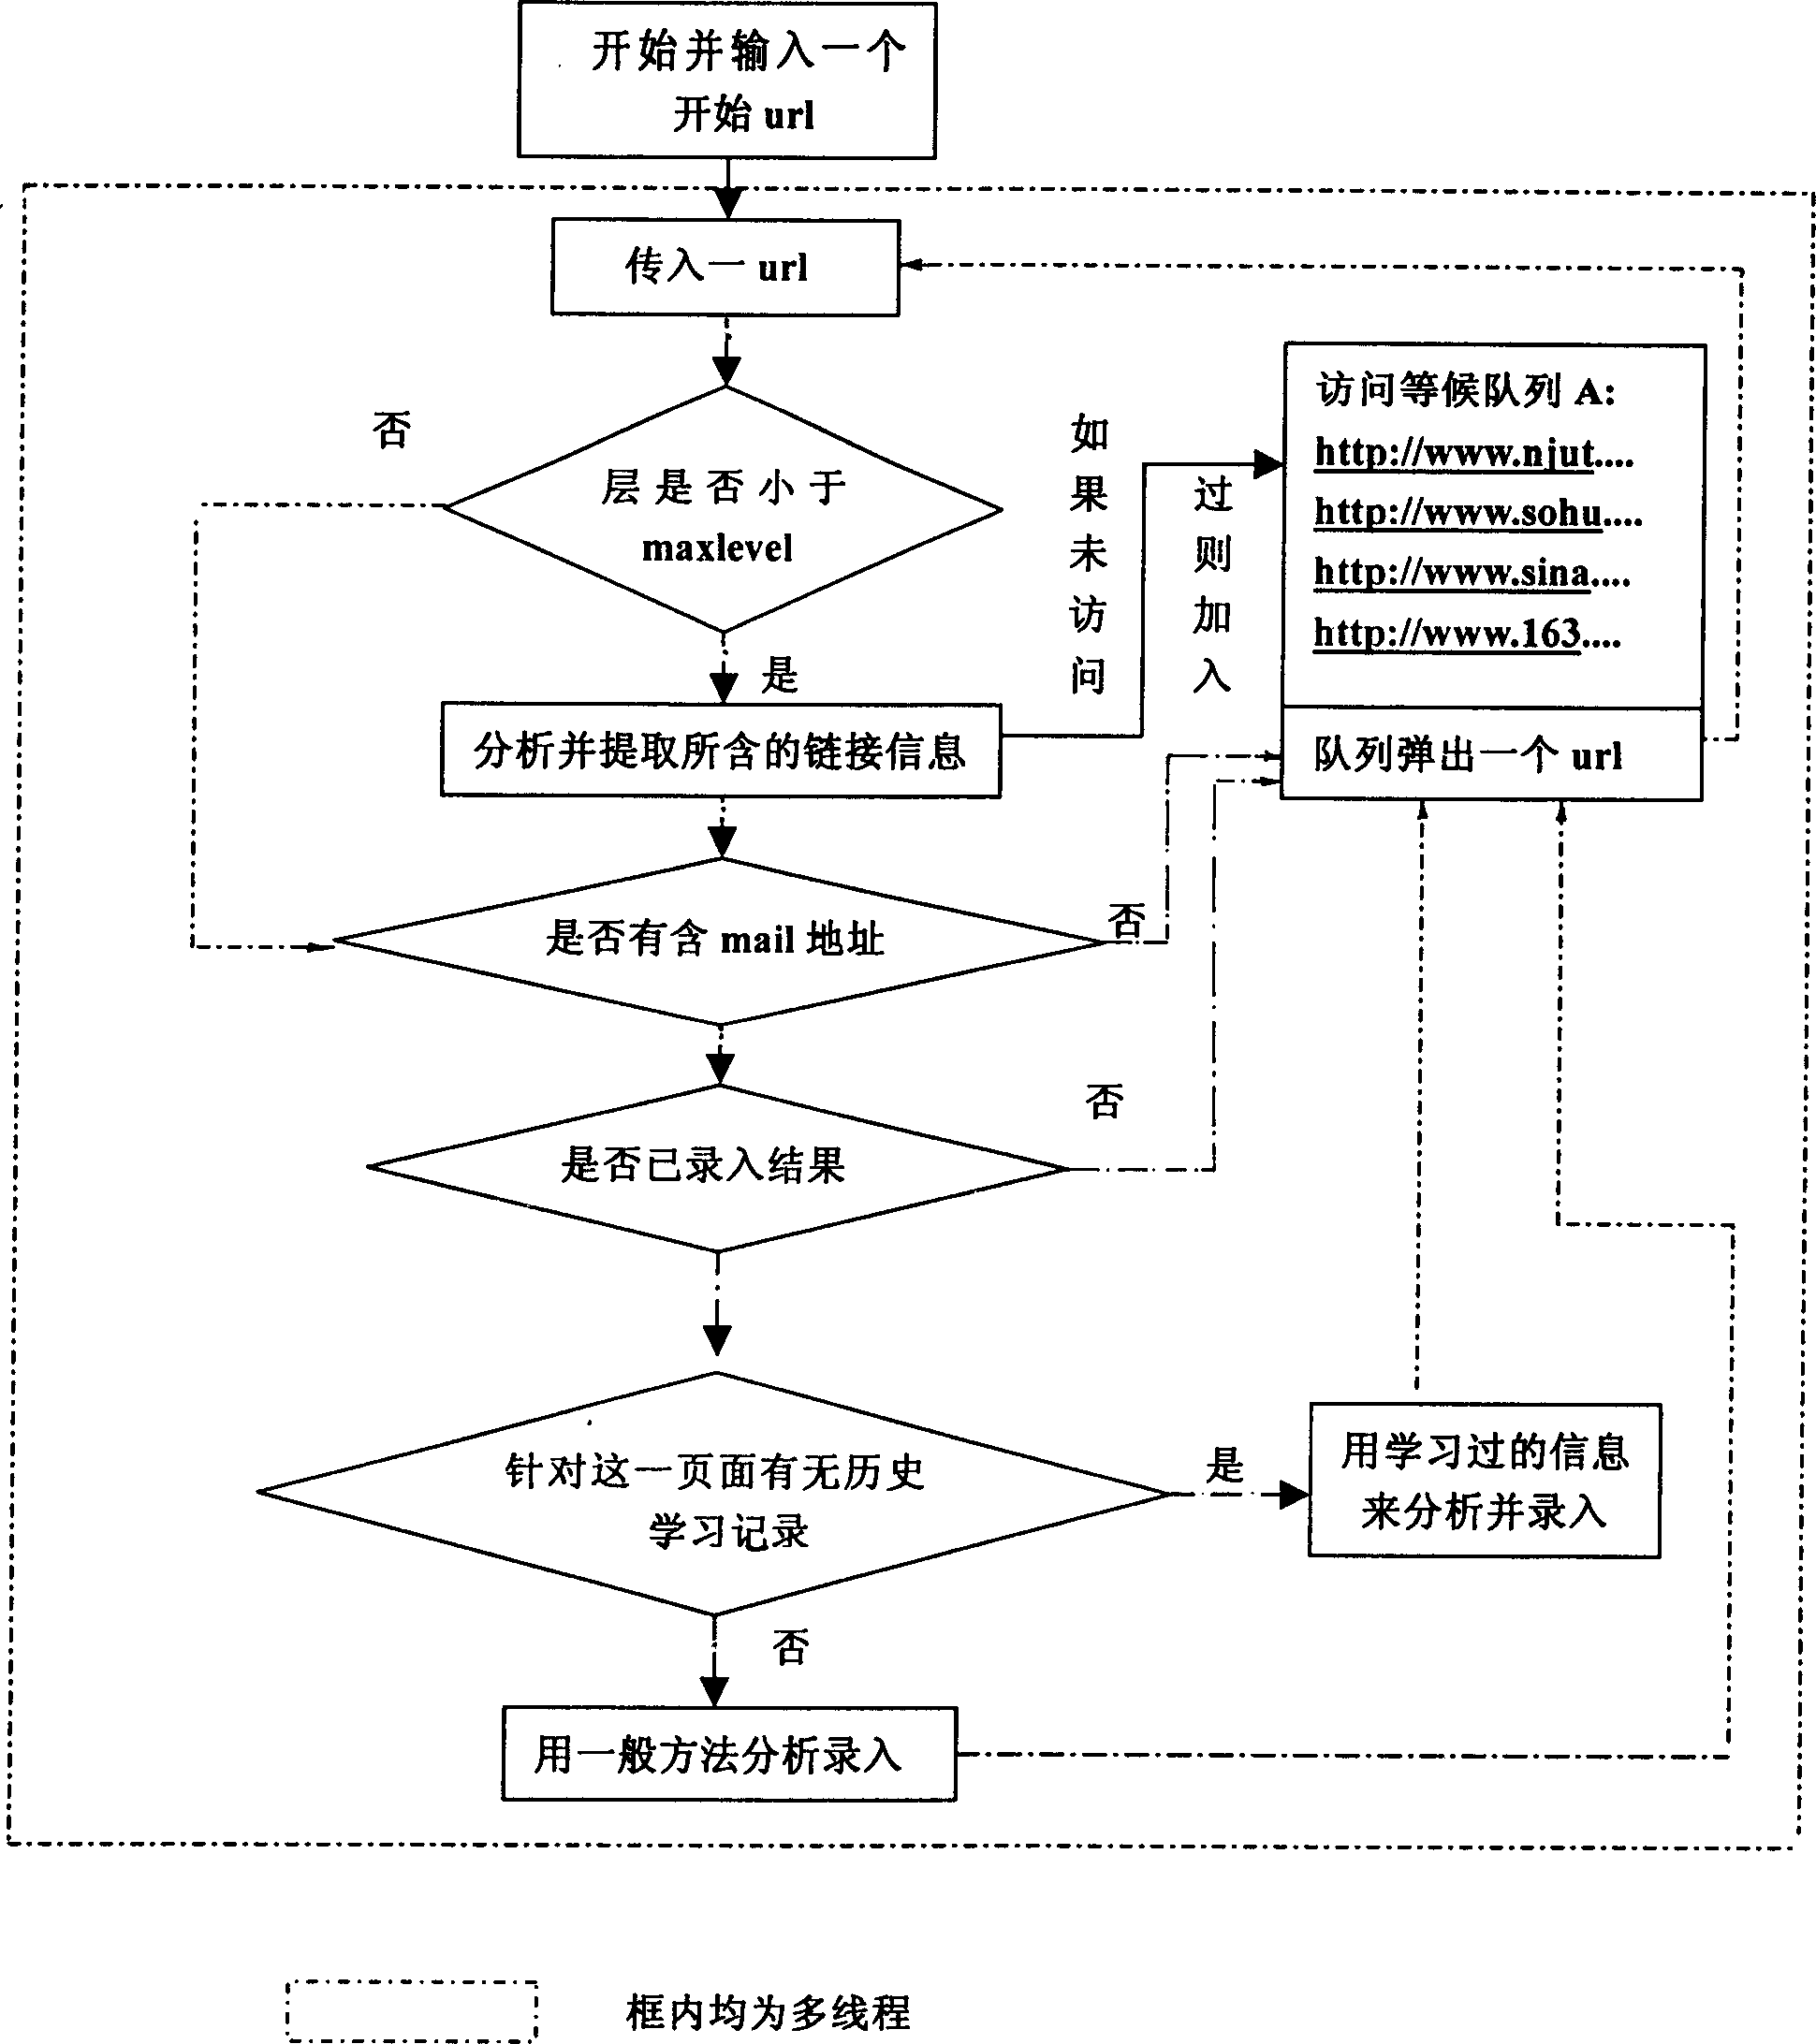 Fine-grained webpage information acquisition method